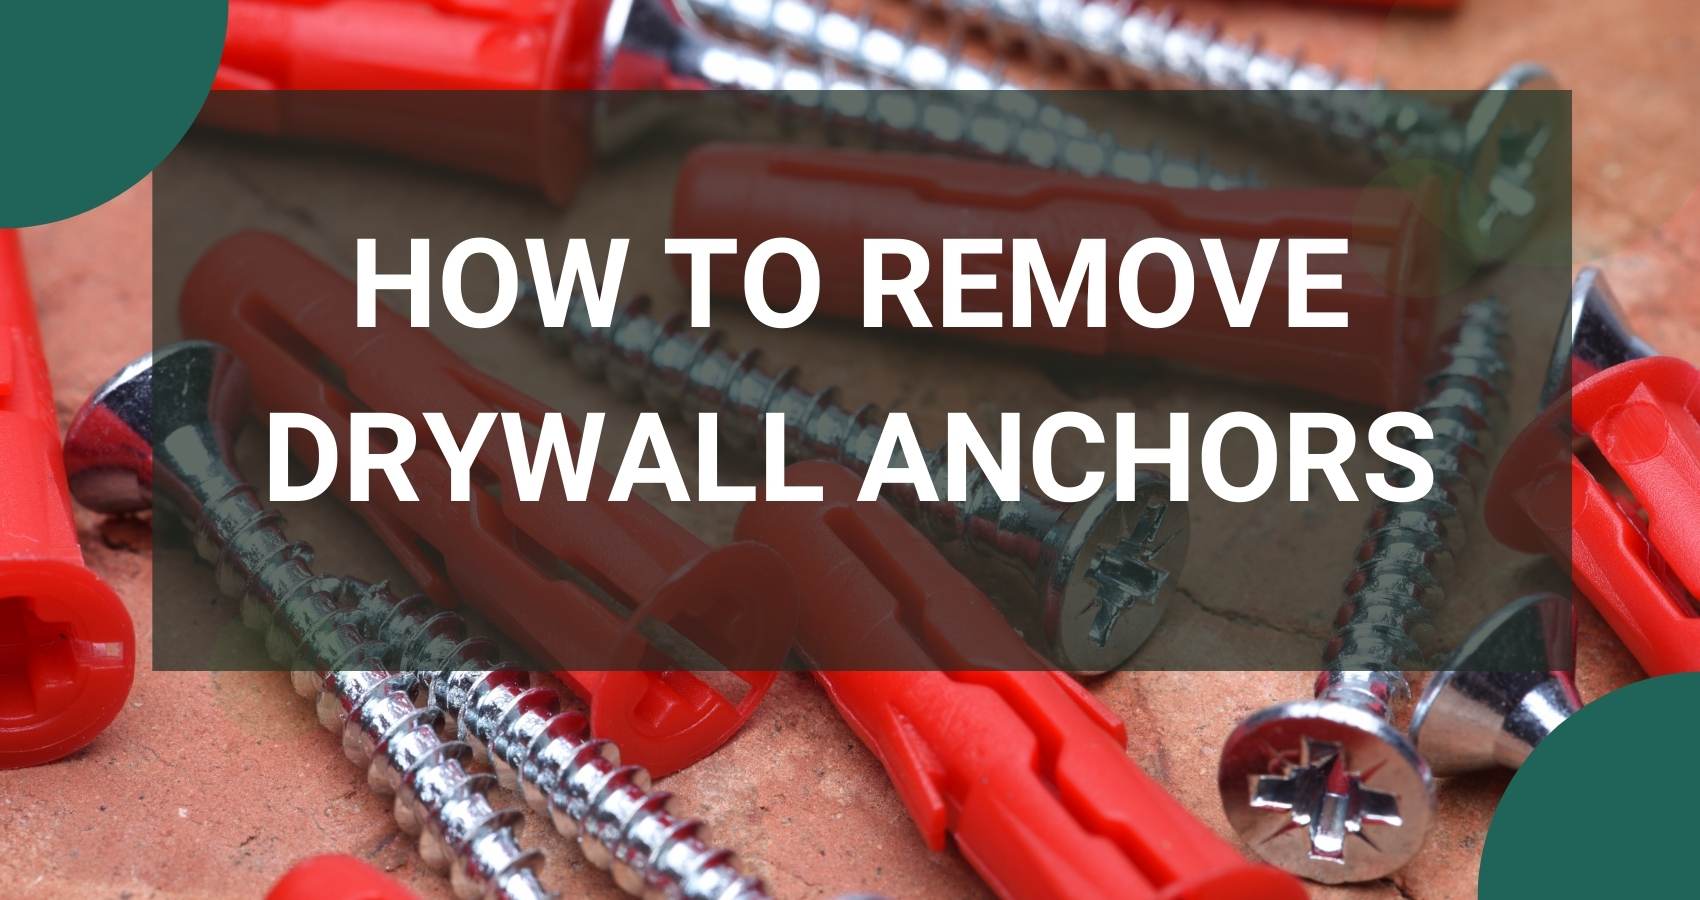 How To Remove Drywall Anchors